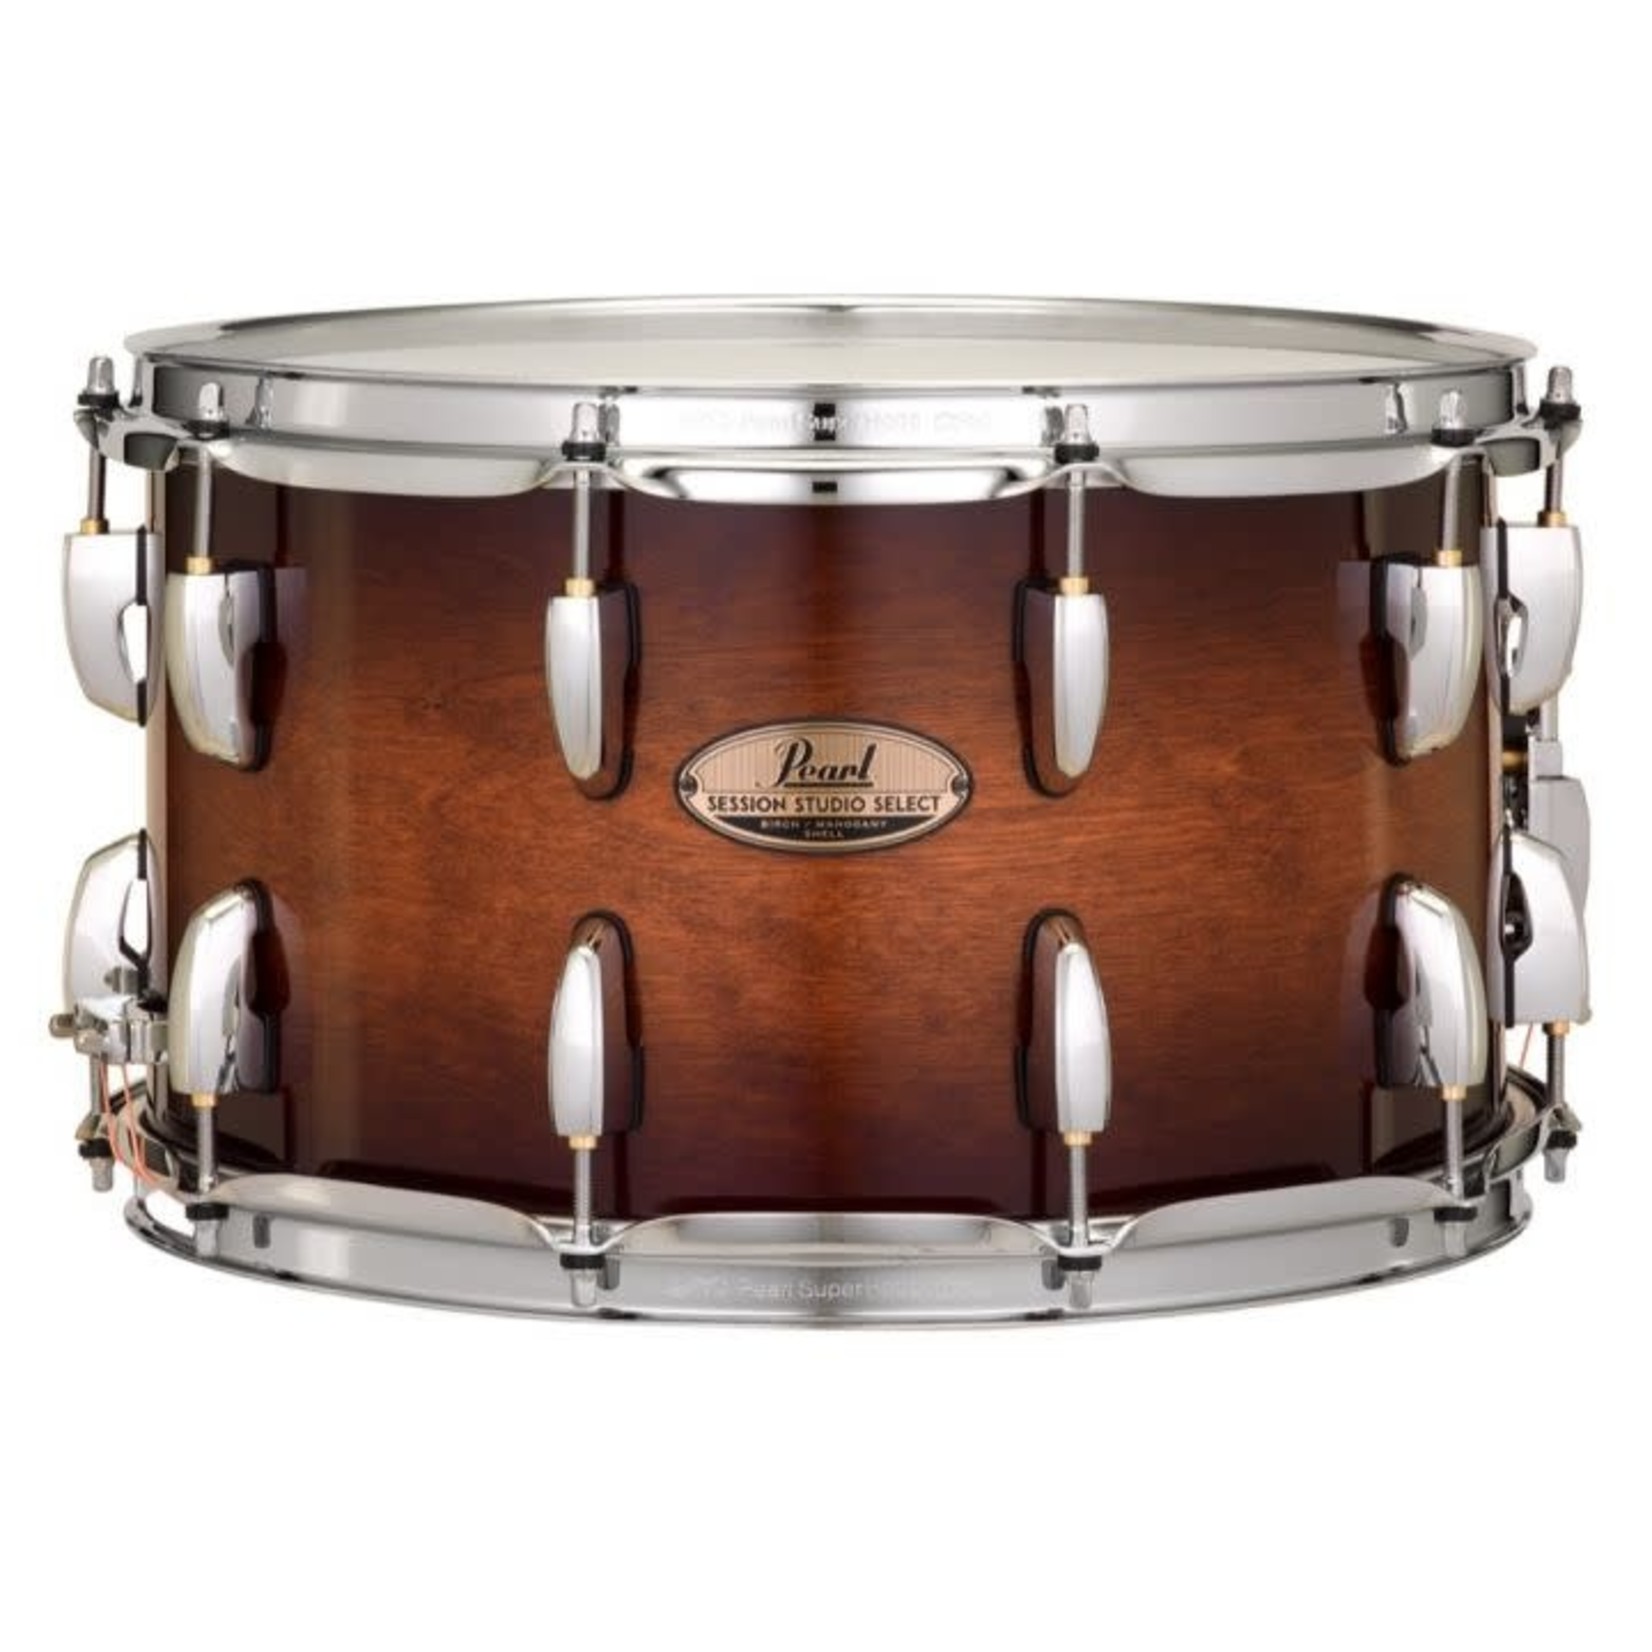 Pearl Pearl Session Studio Select 8x14" Snare Drum (Gloss Barnwood Brown) STS1480S/C314